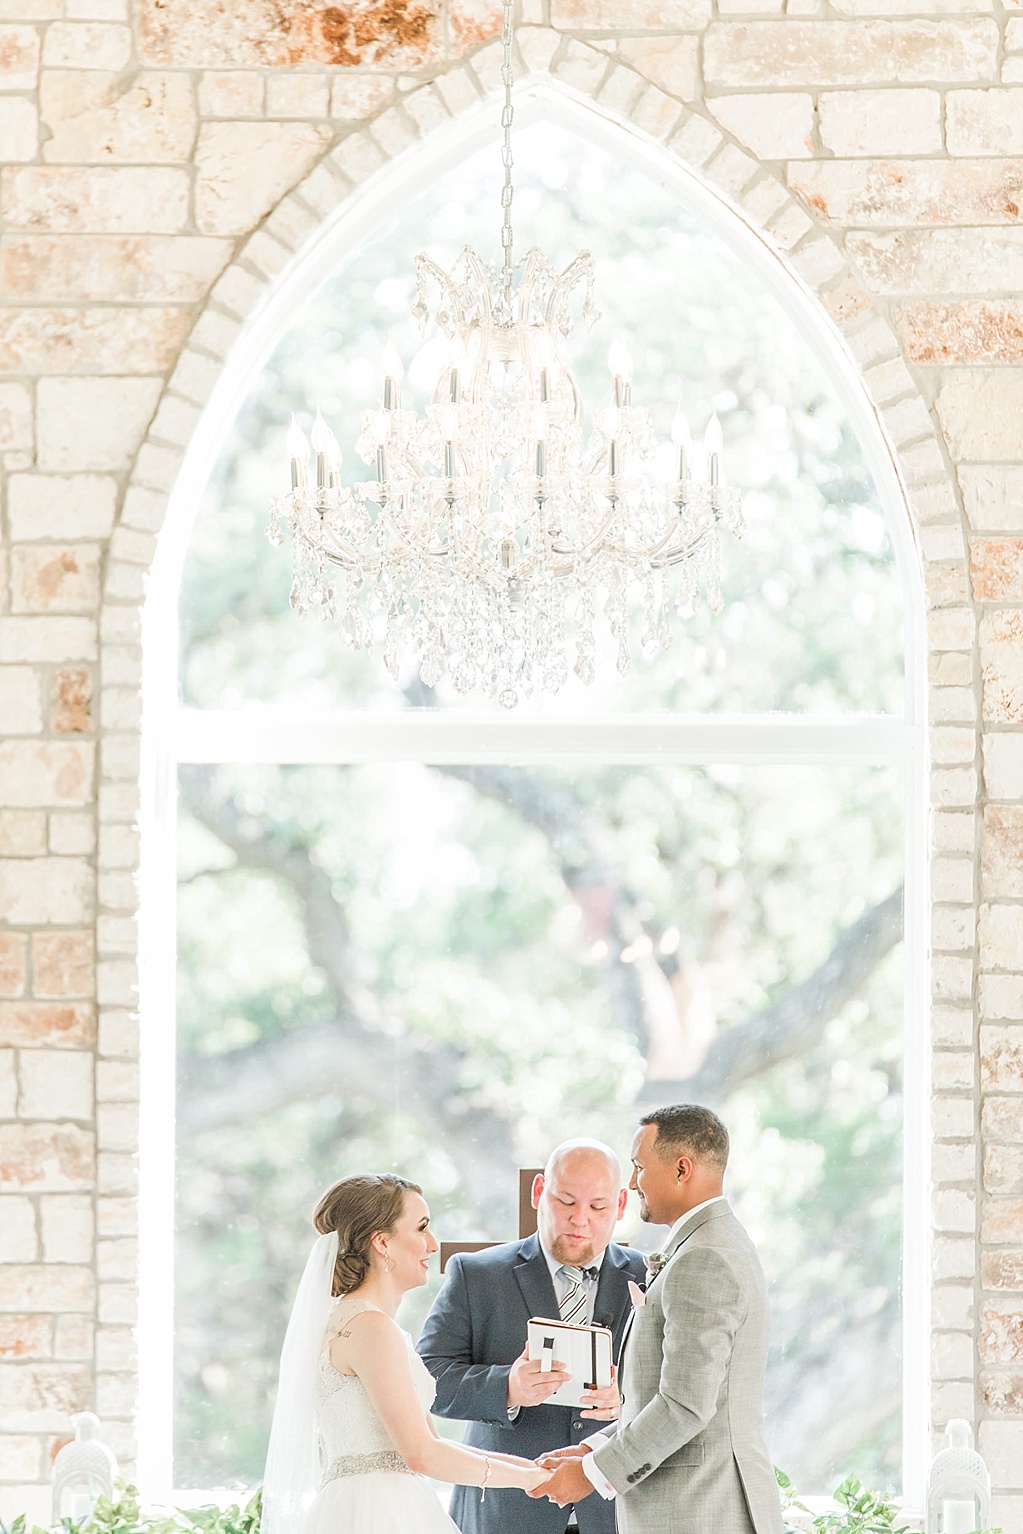 A Blush Vintage Summer Wedding at The Chandelier of Gruene in New Braunfels Texas by Allison Jeffers Photography 0054